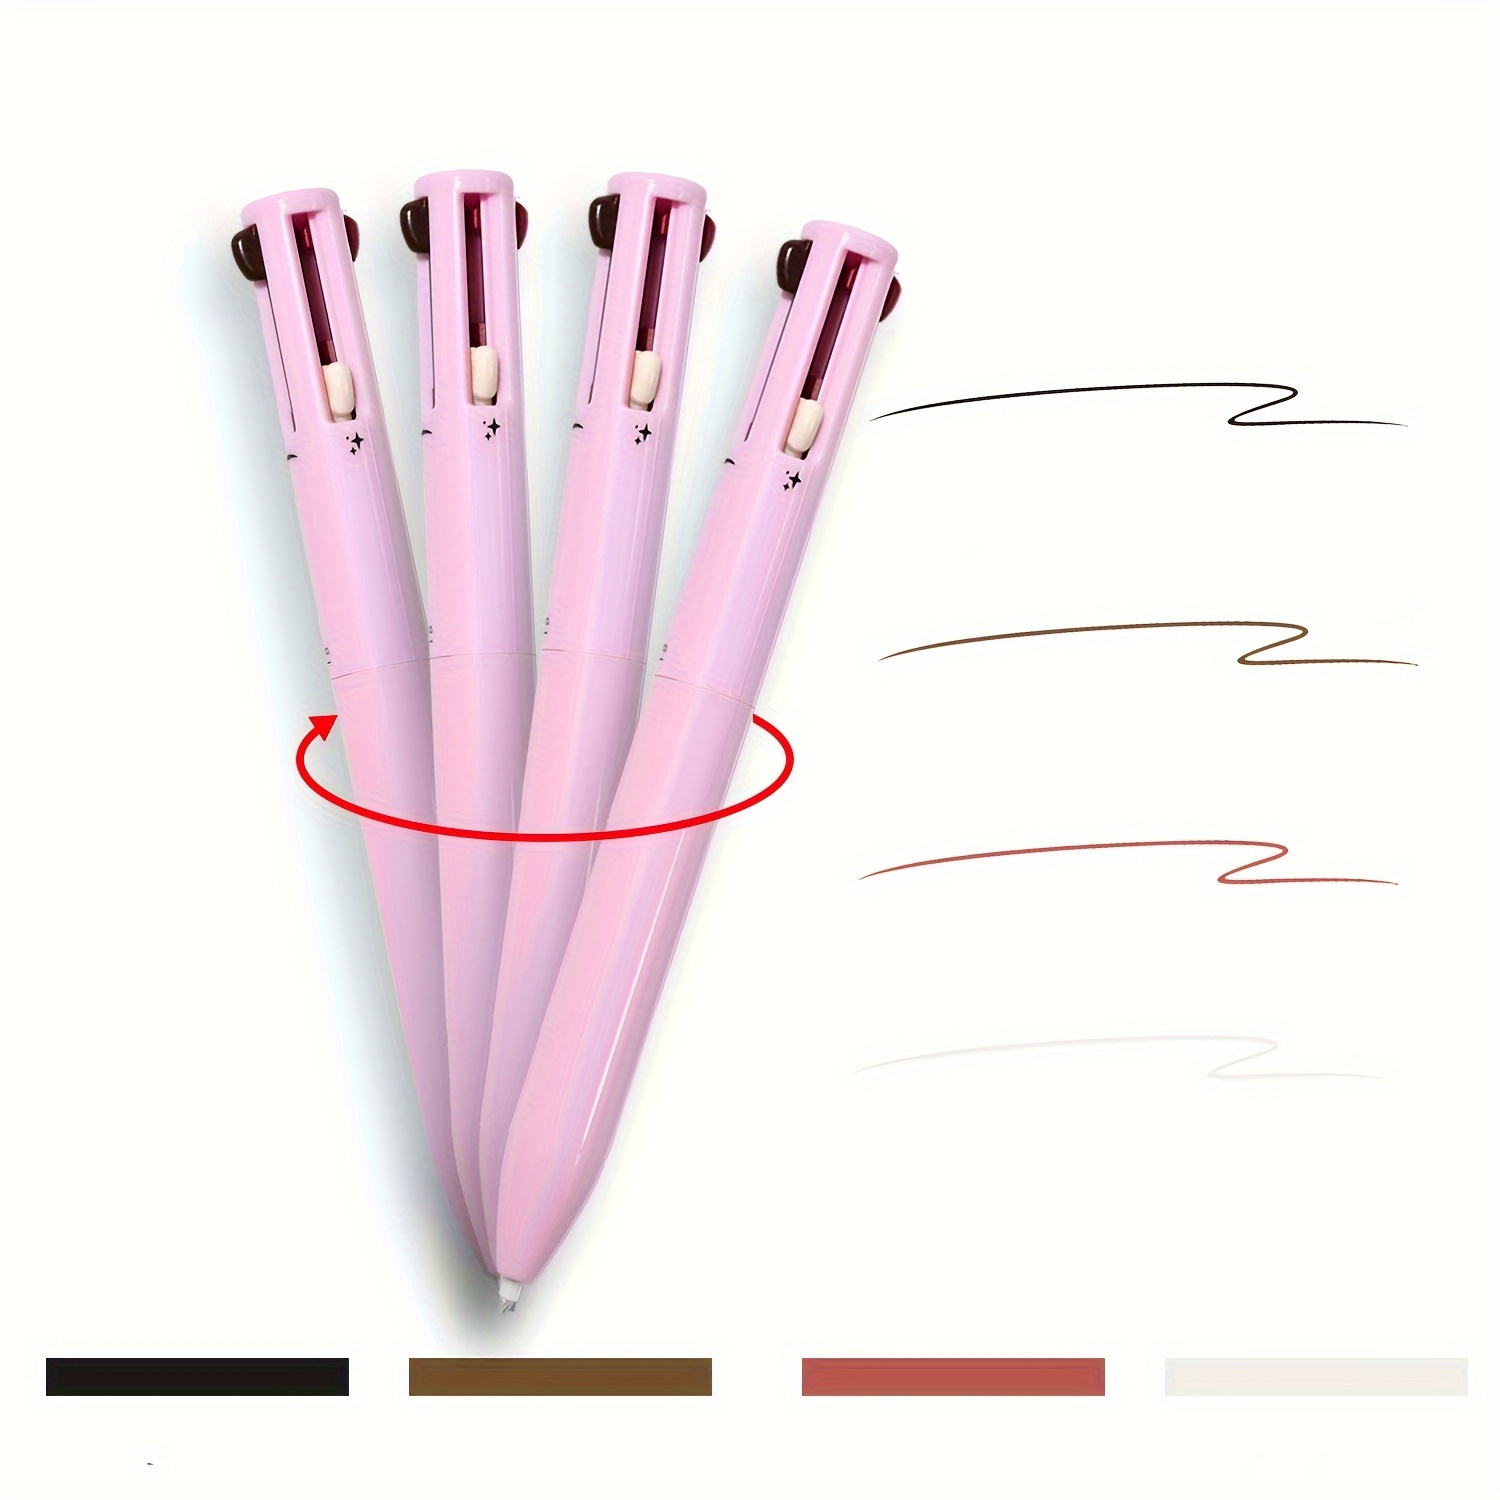 

4-in-1 Long-lasting Makeup Pen - Lip Liner, Eyeliner & Brow Highlighter With Twist Stick, Fine Tip Colorful Cosmetic Pencil For All Skin Types